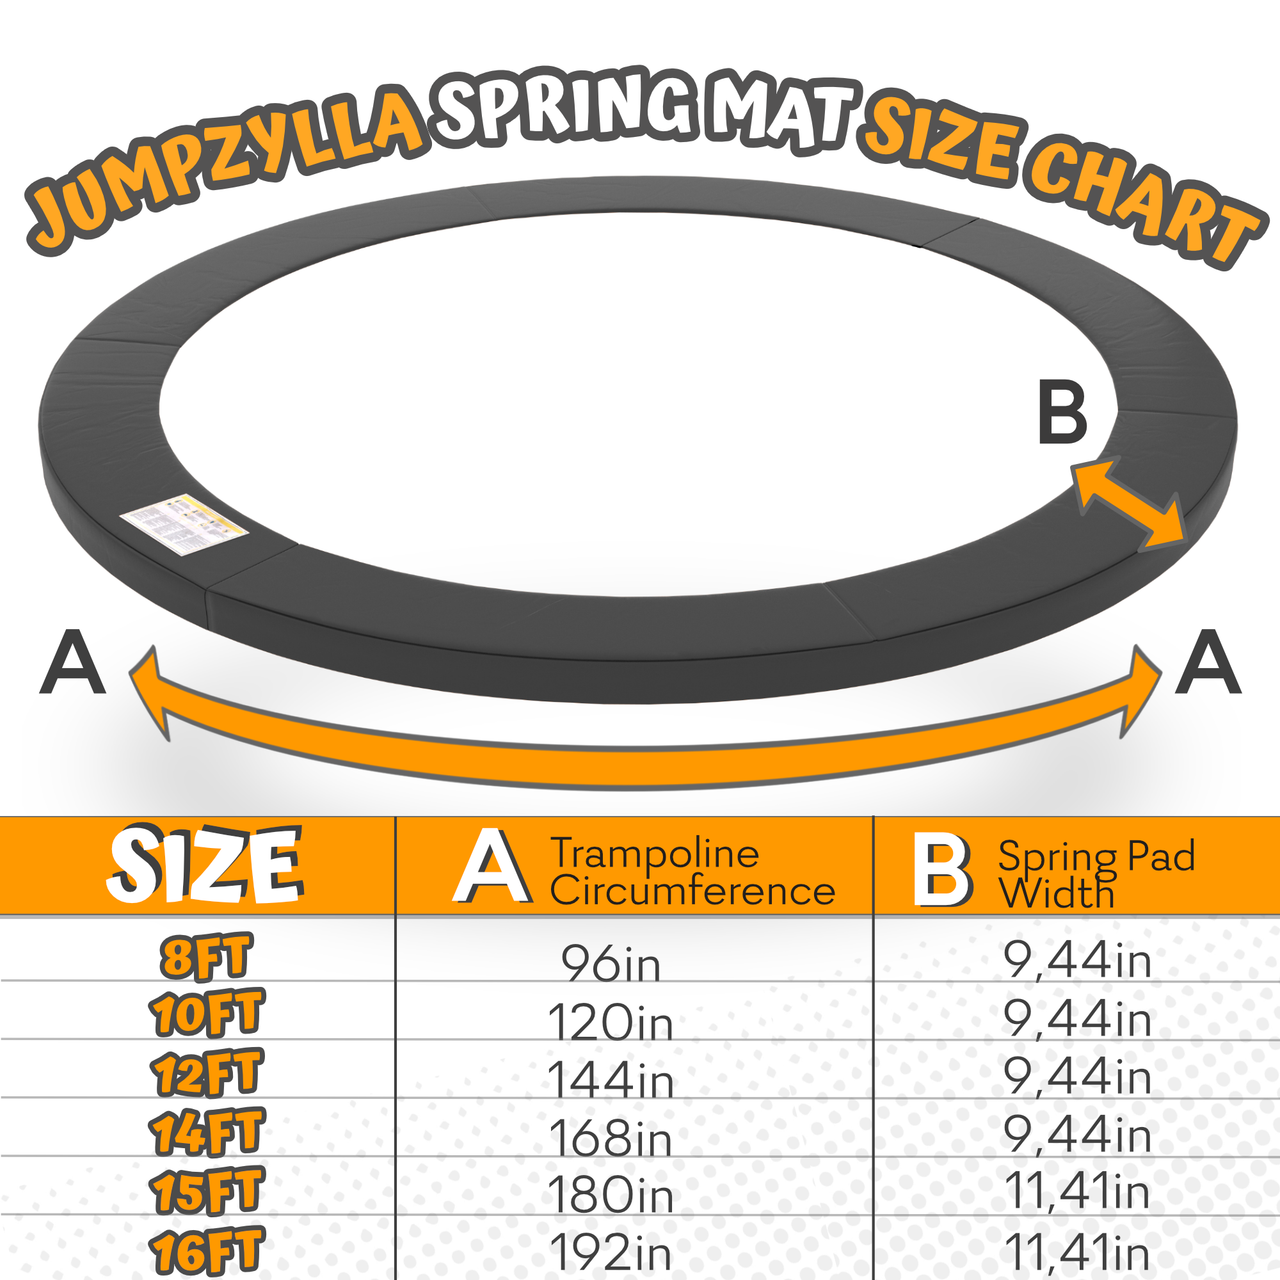 [NEW] Jumpzylla Double Sided Spring Cover Pads for 8FT Trampolines